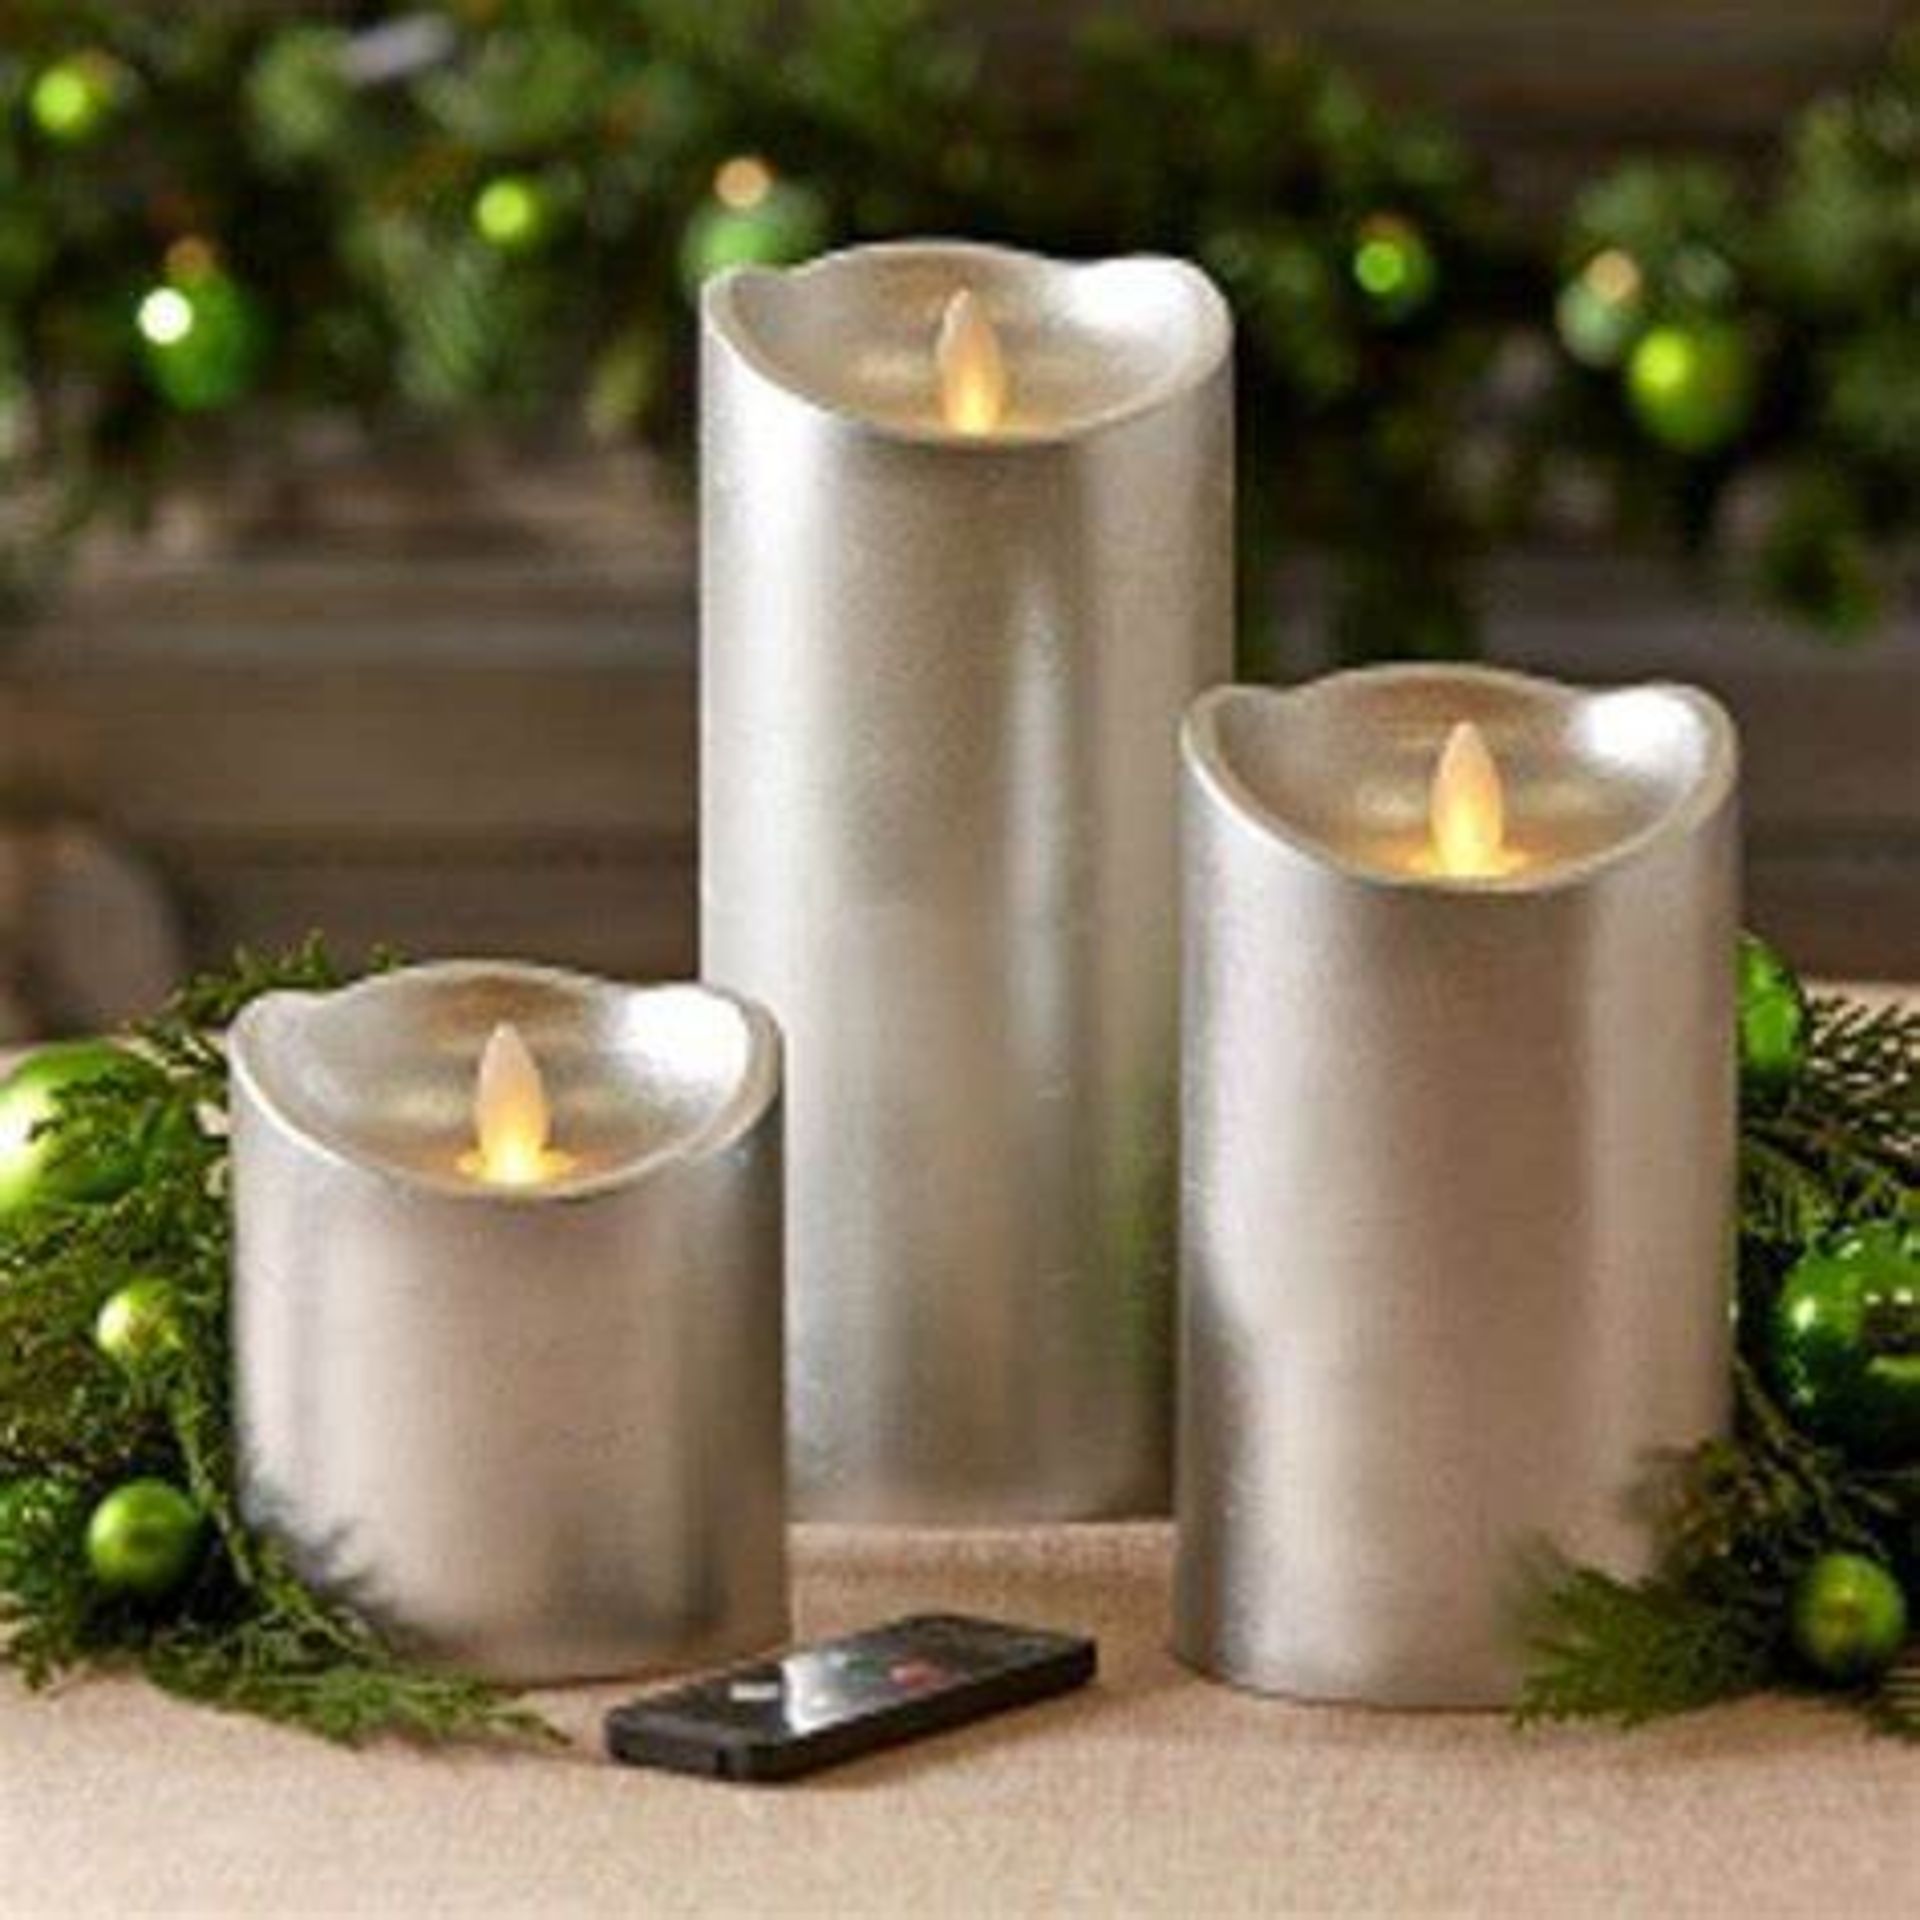 2 x Luxe Collection 3 x 4 Silver Flickering Flame LED Wax Candle This real wax battery operated